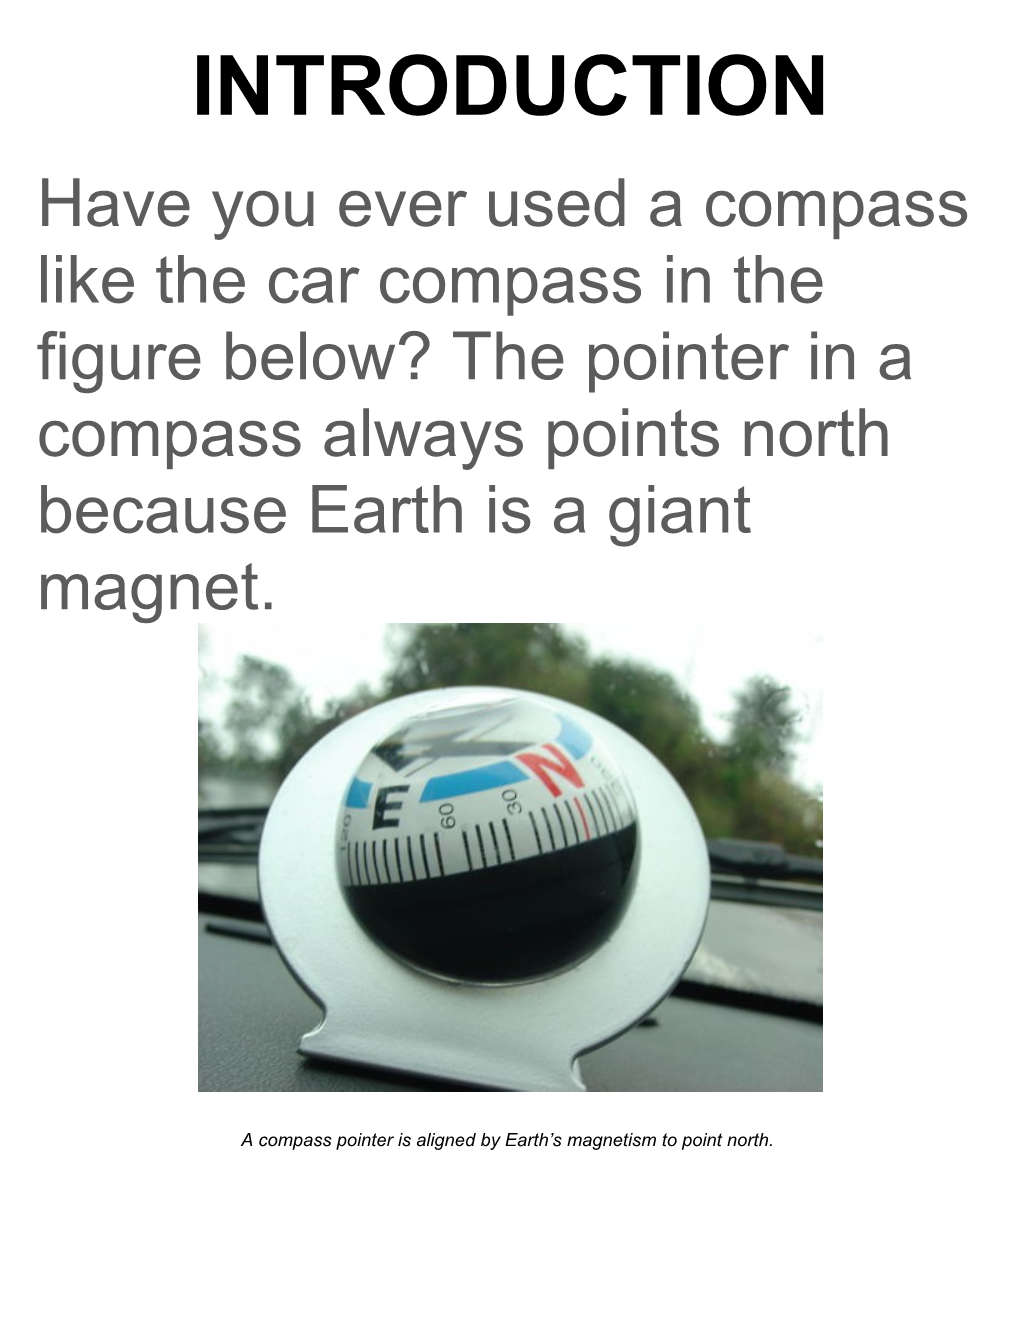 A Compass Pointer Is Aligned by Earth S Magnetism to Point North